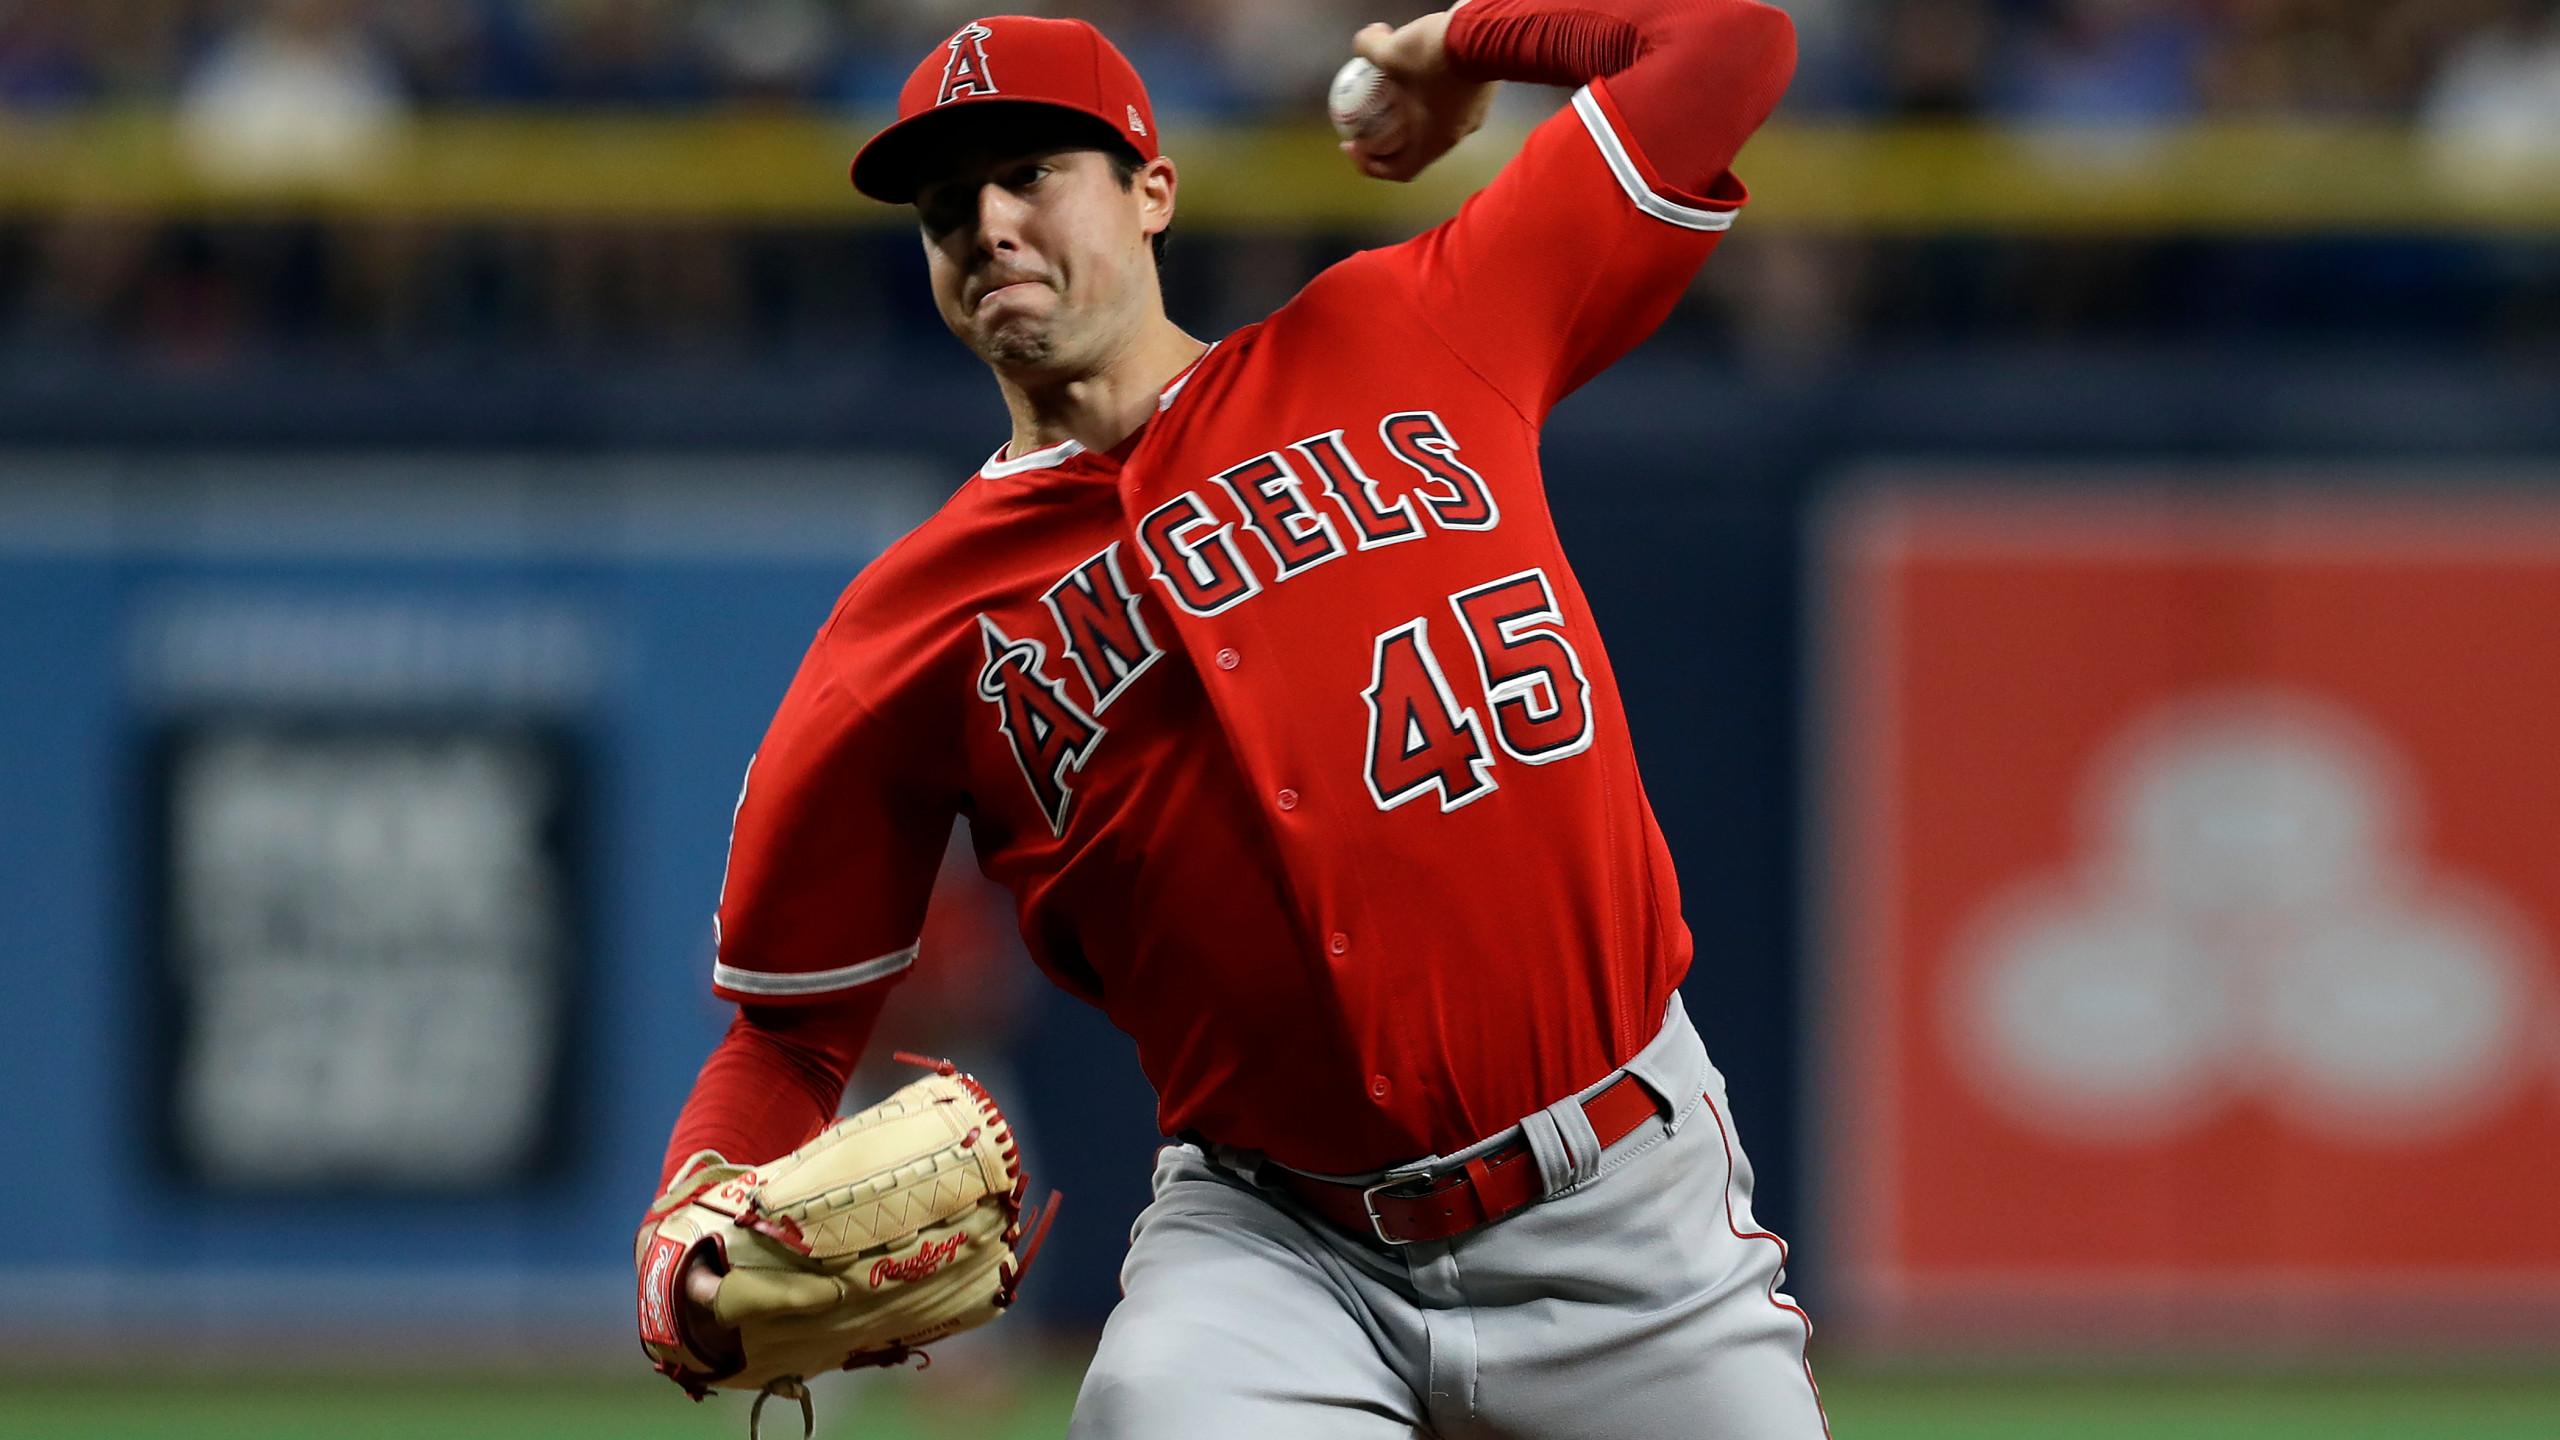 Angels pitcher dies at 27 years old, game with Rangers